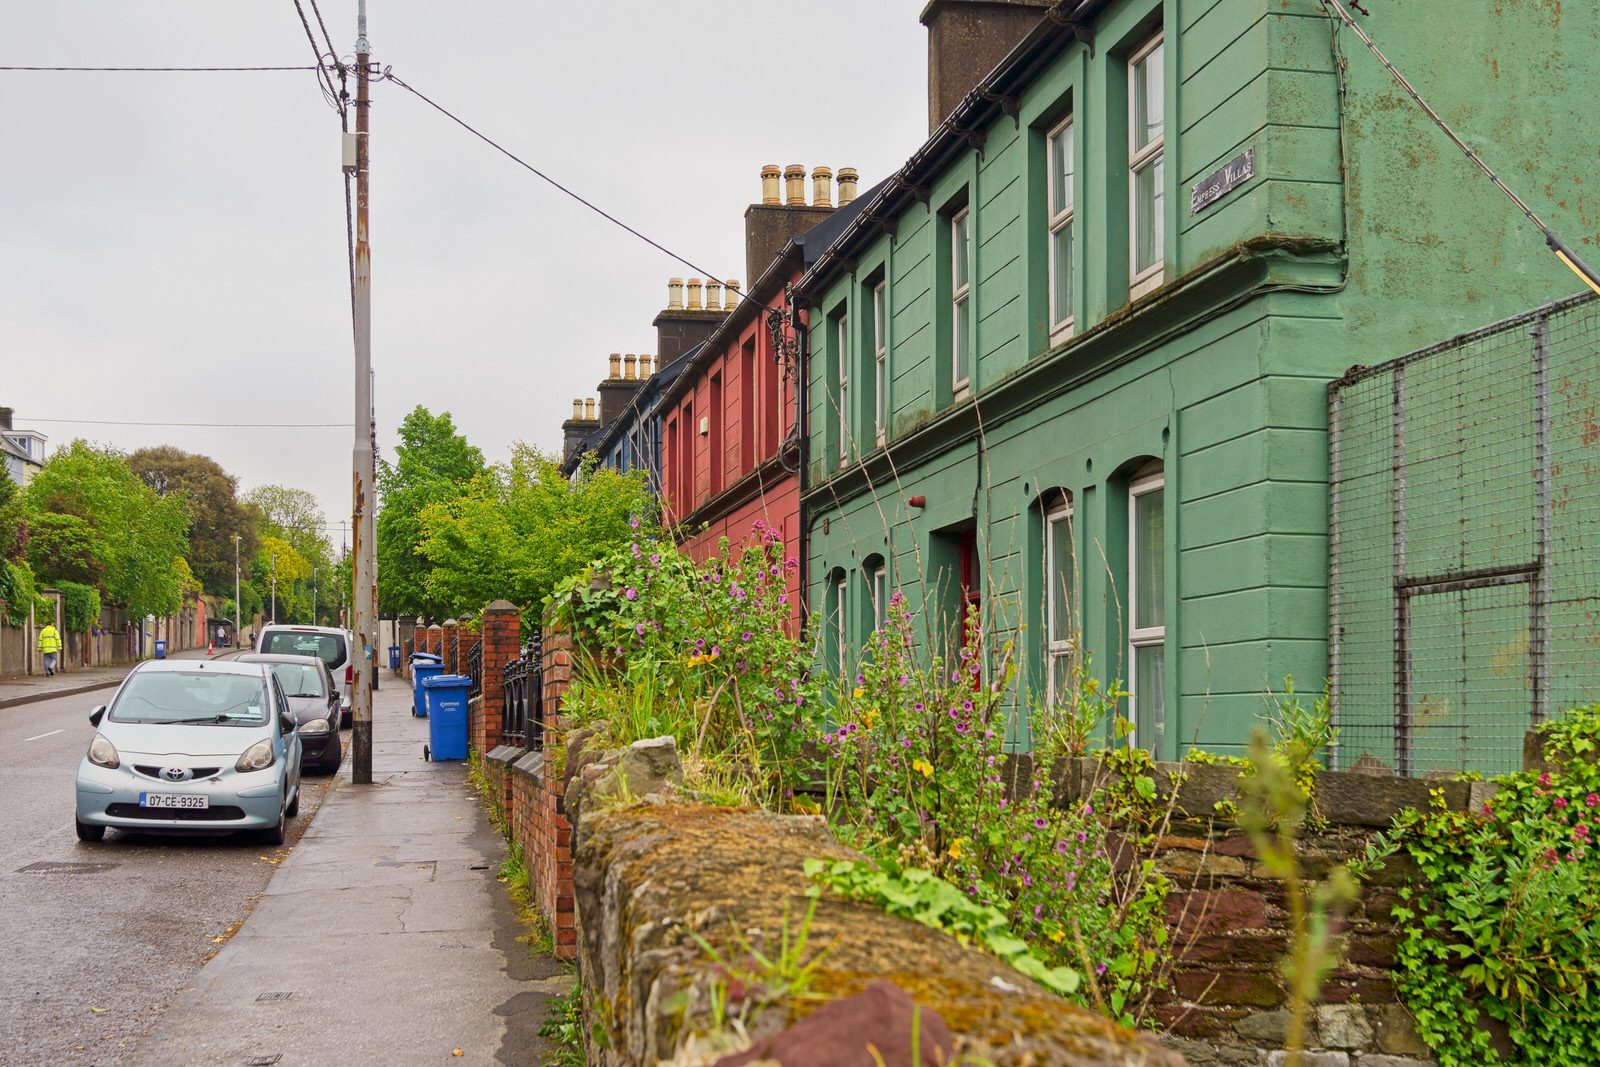 A WALK ALONG SUMMERHILL NORTH [IN CORK EVERYWHERE IS UPHILL OR DOWNHILL]-225790-1